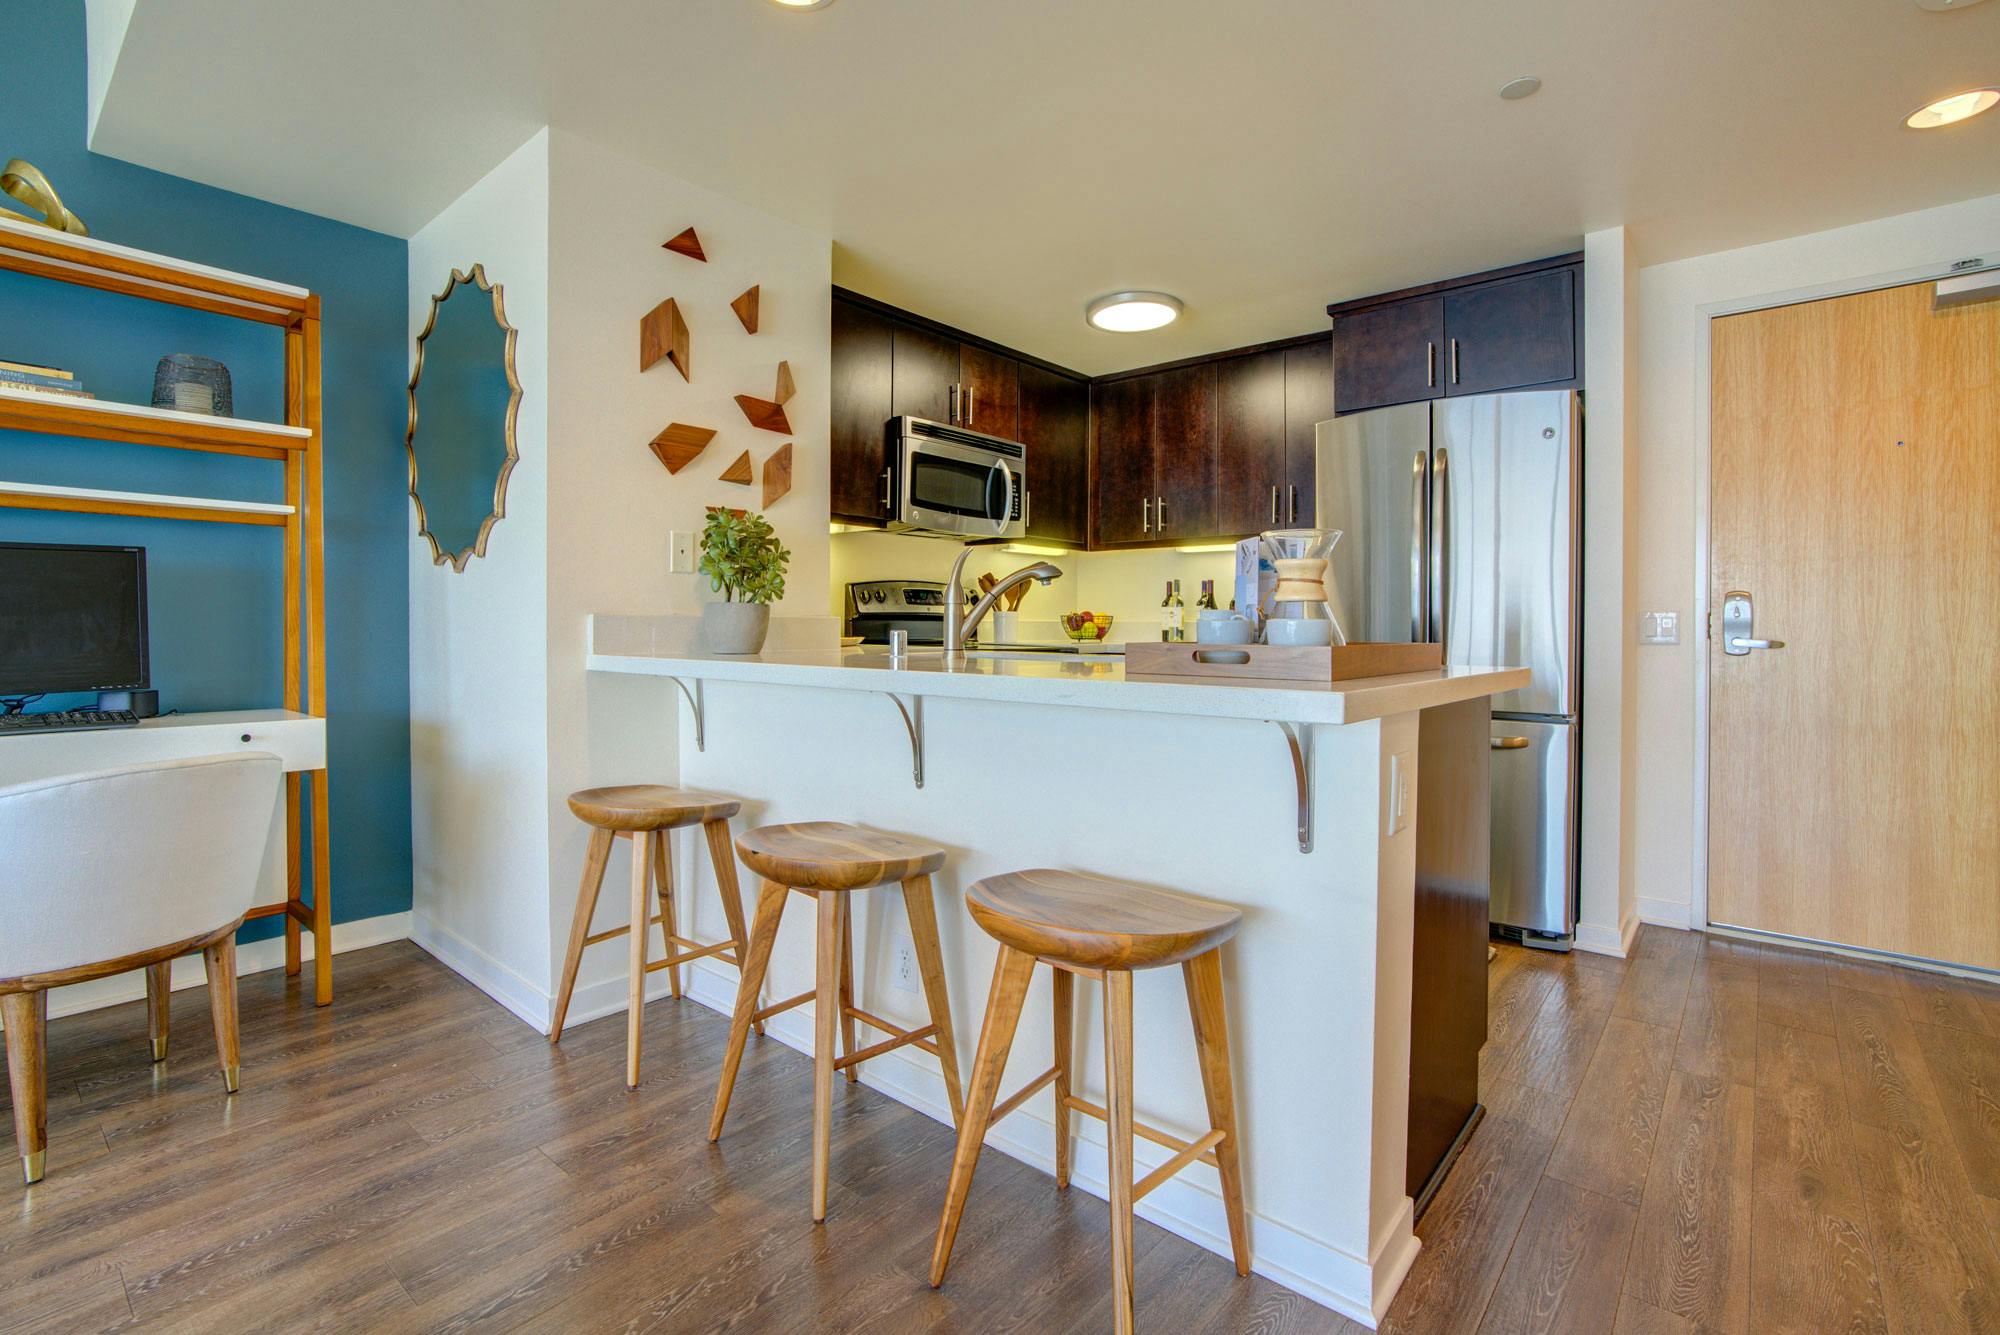 The kitchens in The Towers are adorned with hardwood flooring, smooth, classy countertops, and well-designed cabinetry.